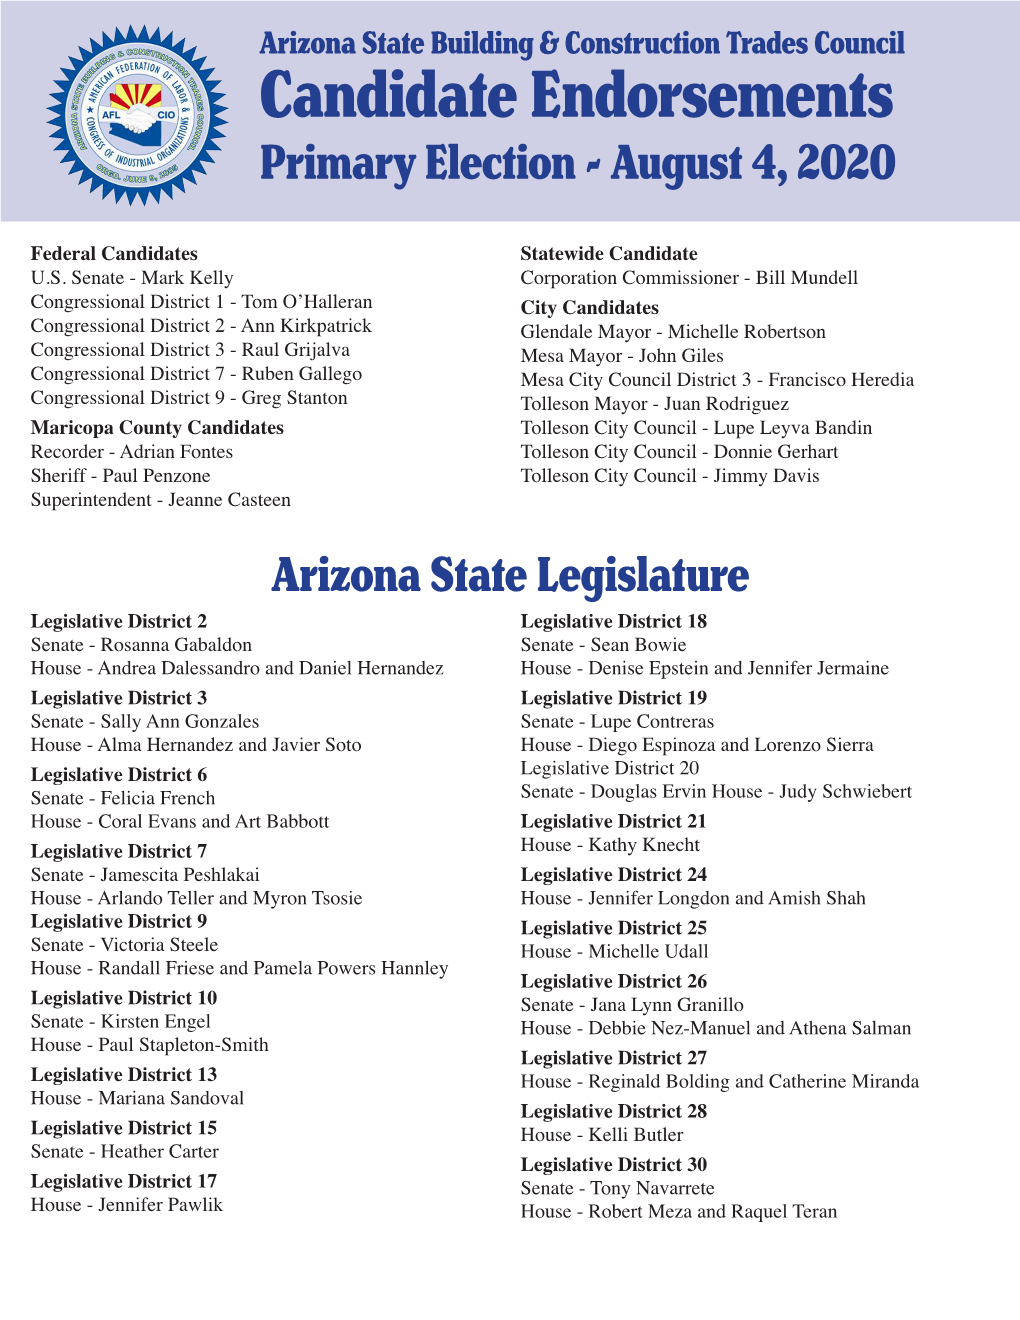 Candidate Endorsements Primary Election - August 4, 2020